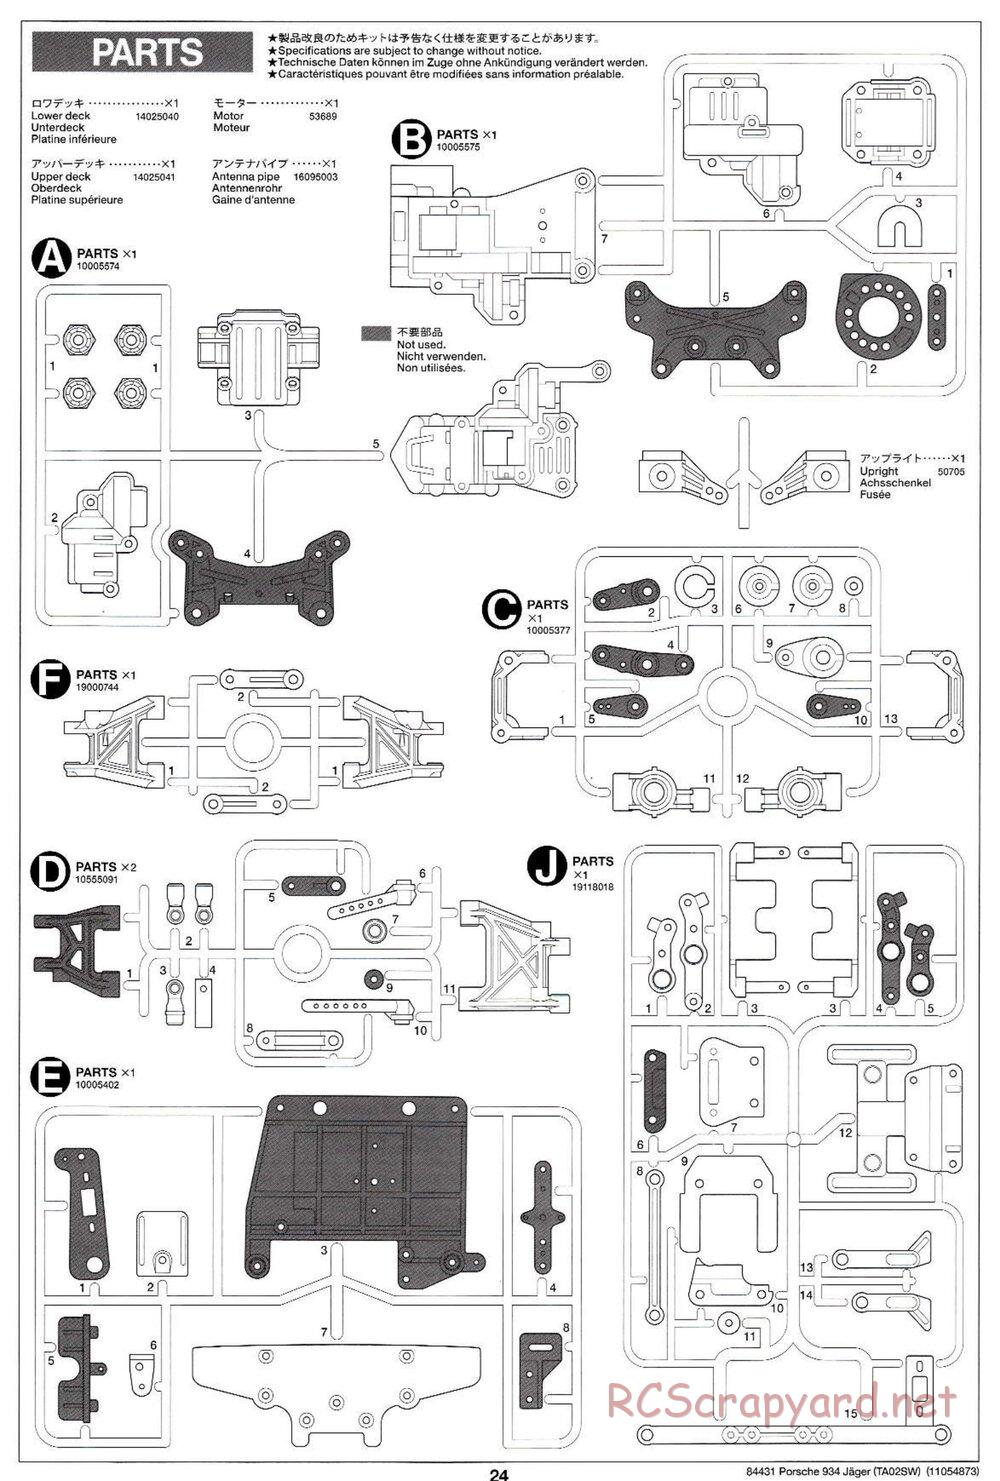 Tamiya - Porsche Turbo RSR Type 934 Jagermeister - TA-02SW Chassis - Manual - Page 24